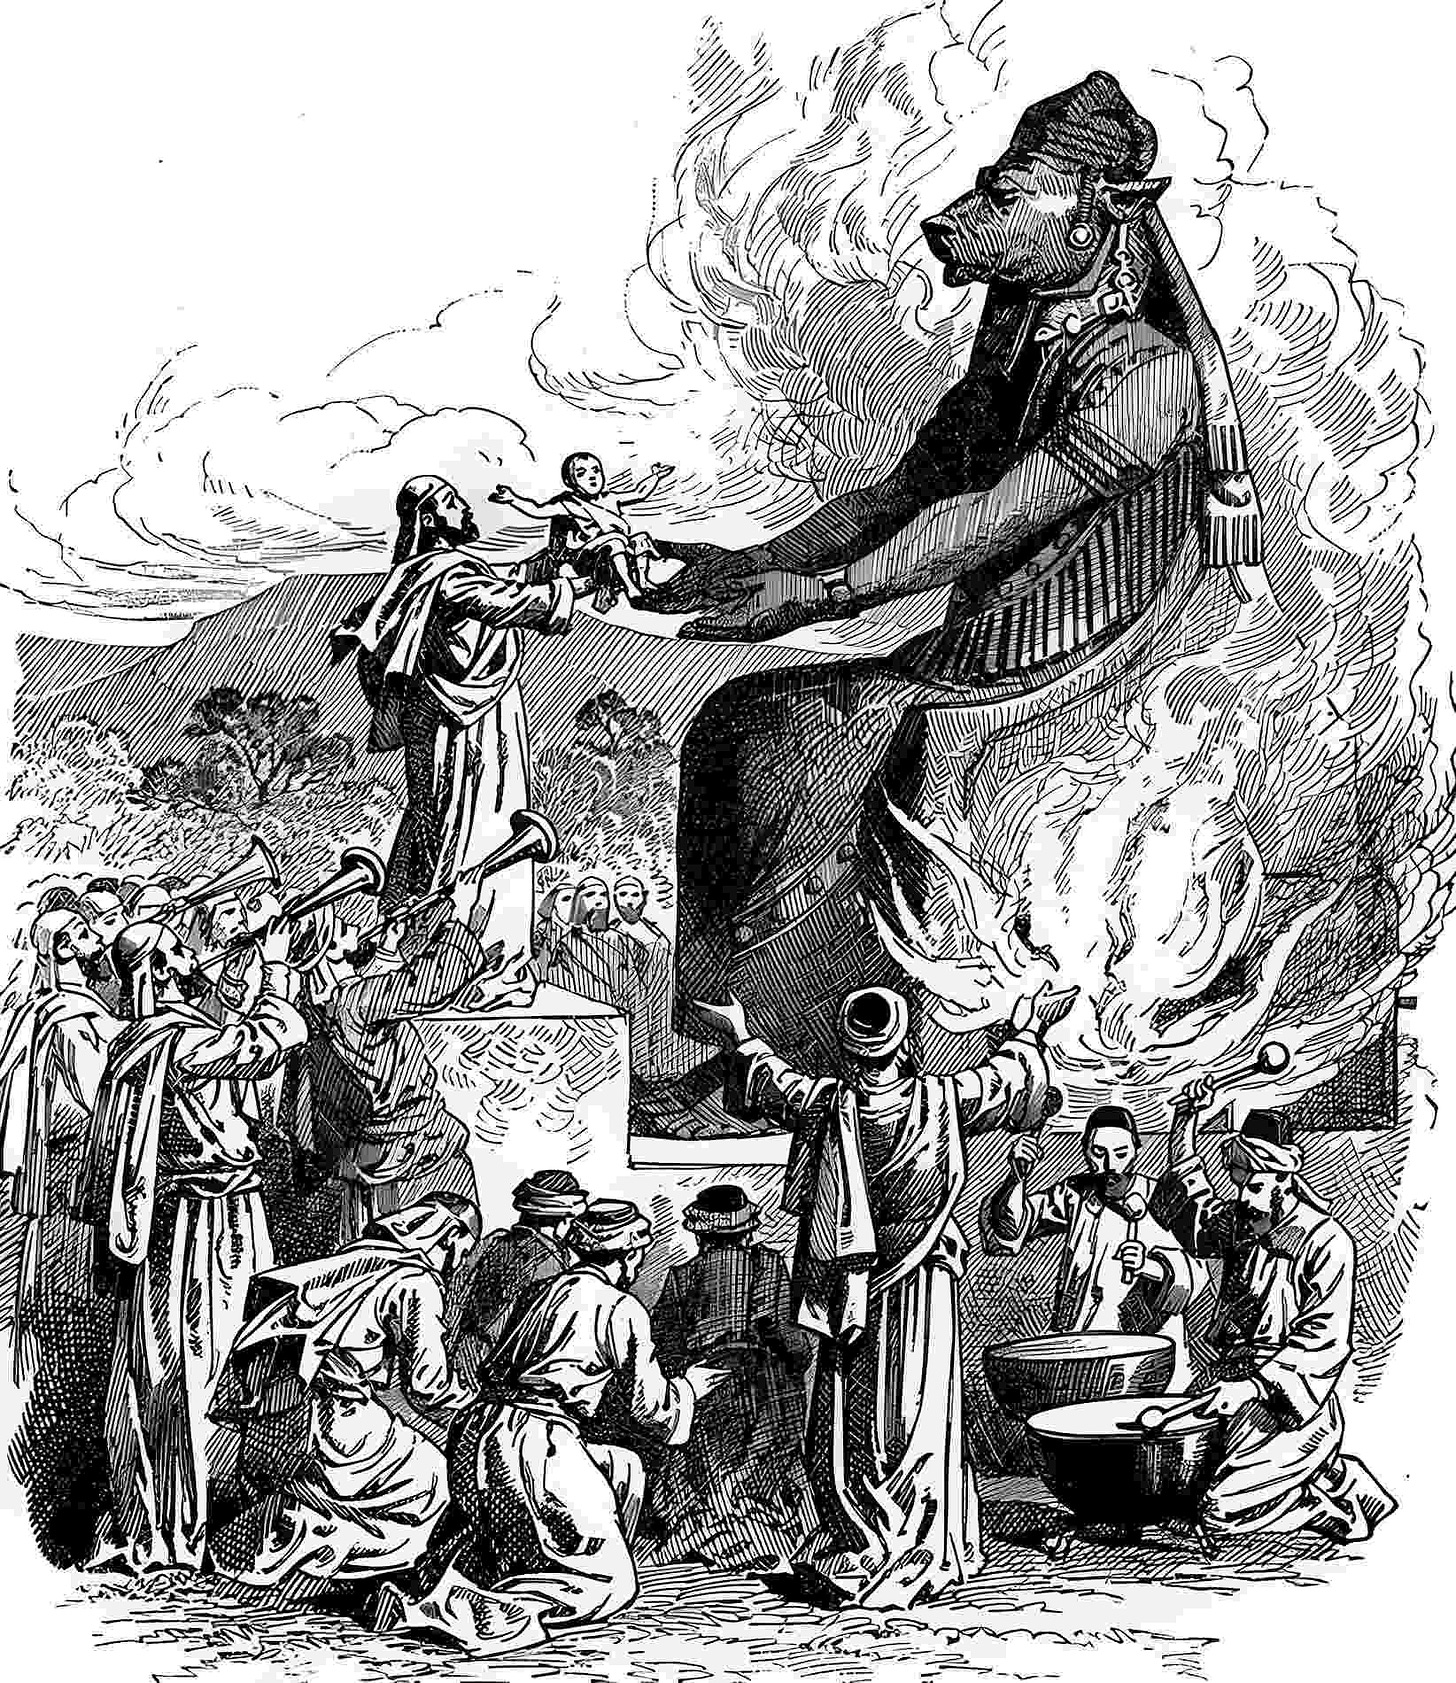 Moloch, a Canaanite deity, also demanded child sacrifice. He was a bull-headed deity who was not solely practiced among the Phoenicians or their Carthaginian cousins.